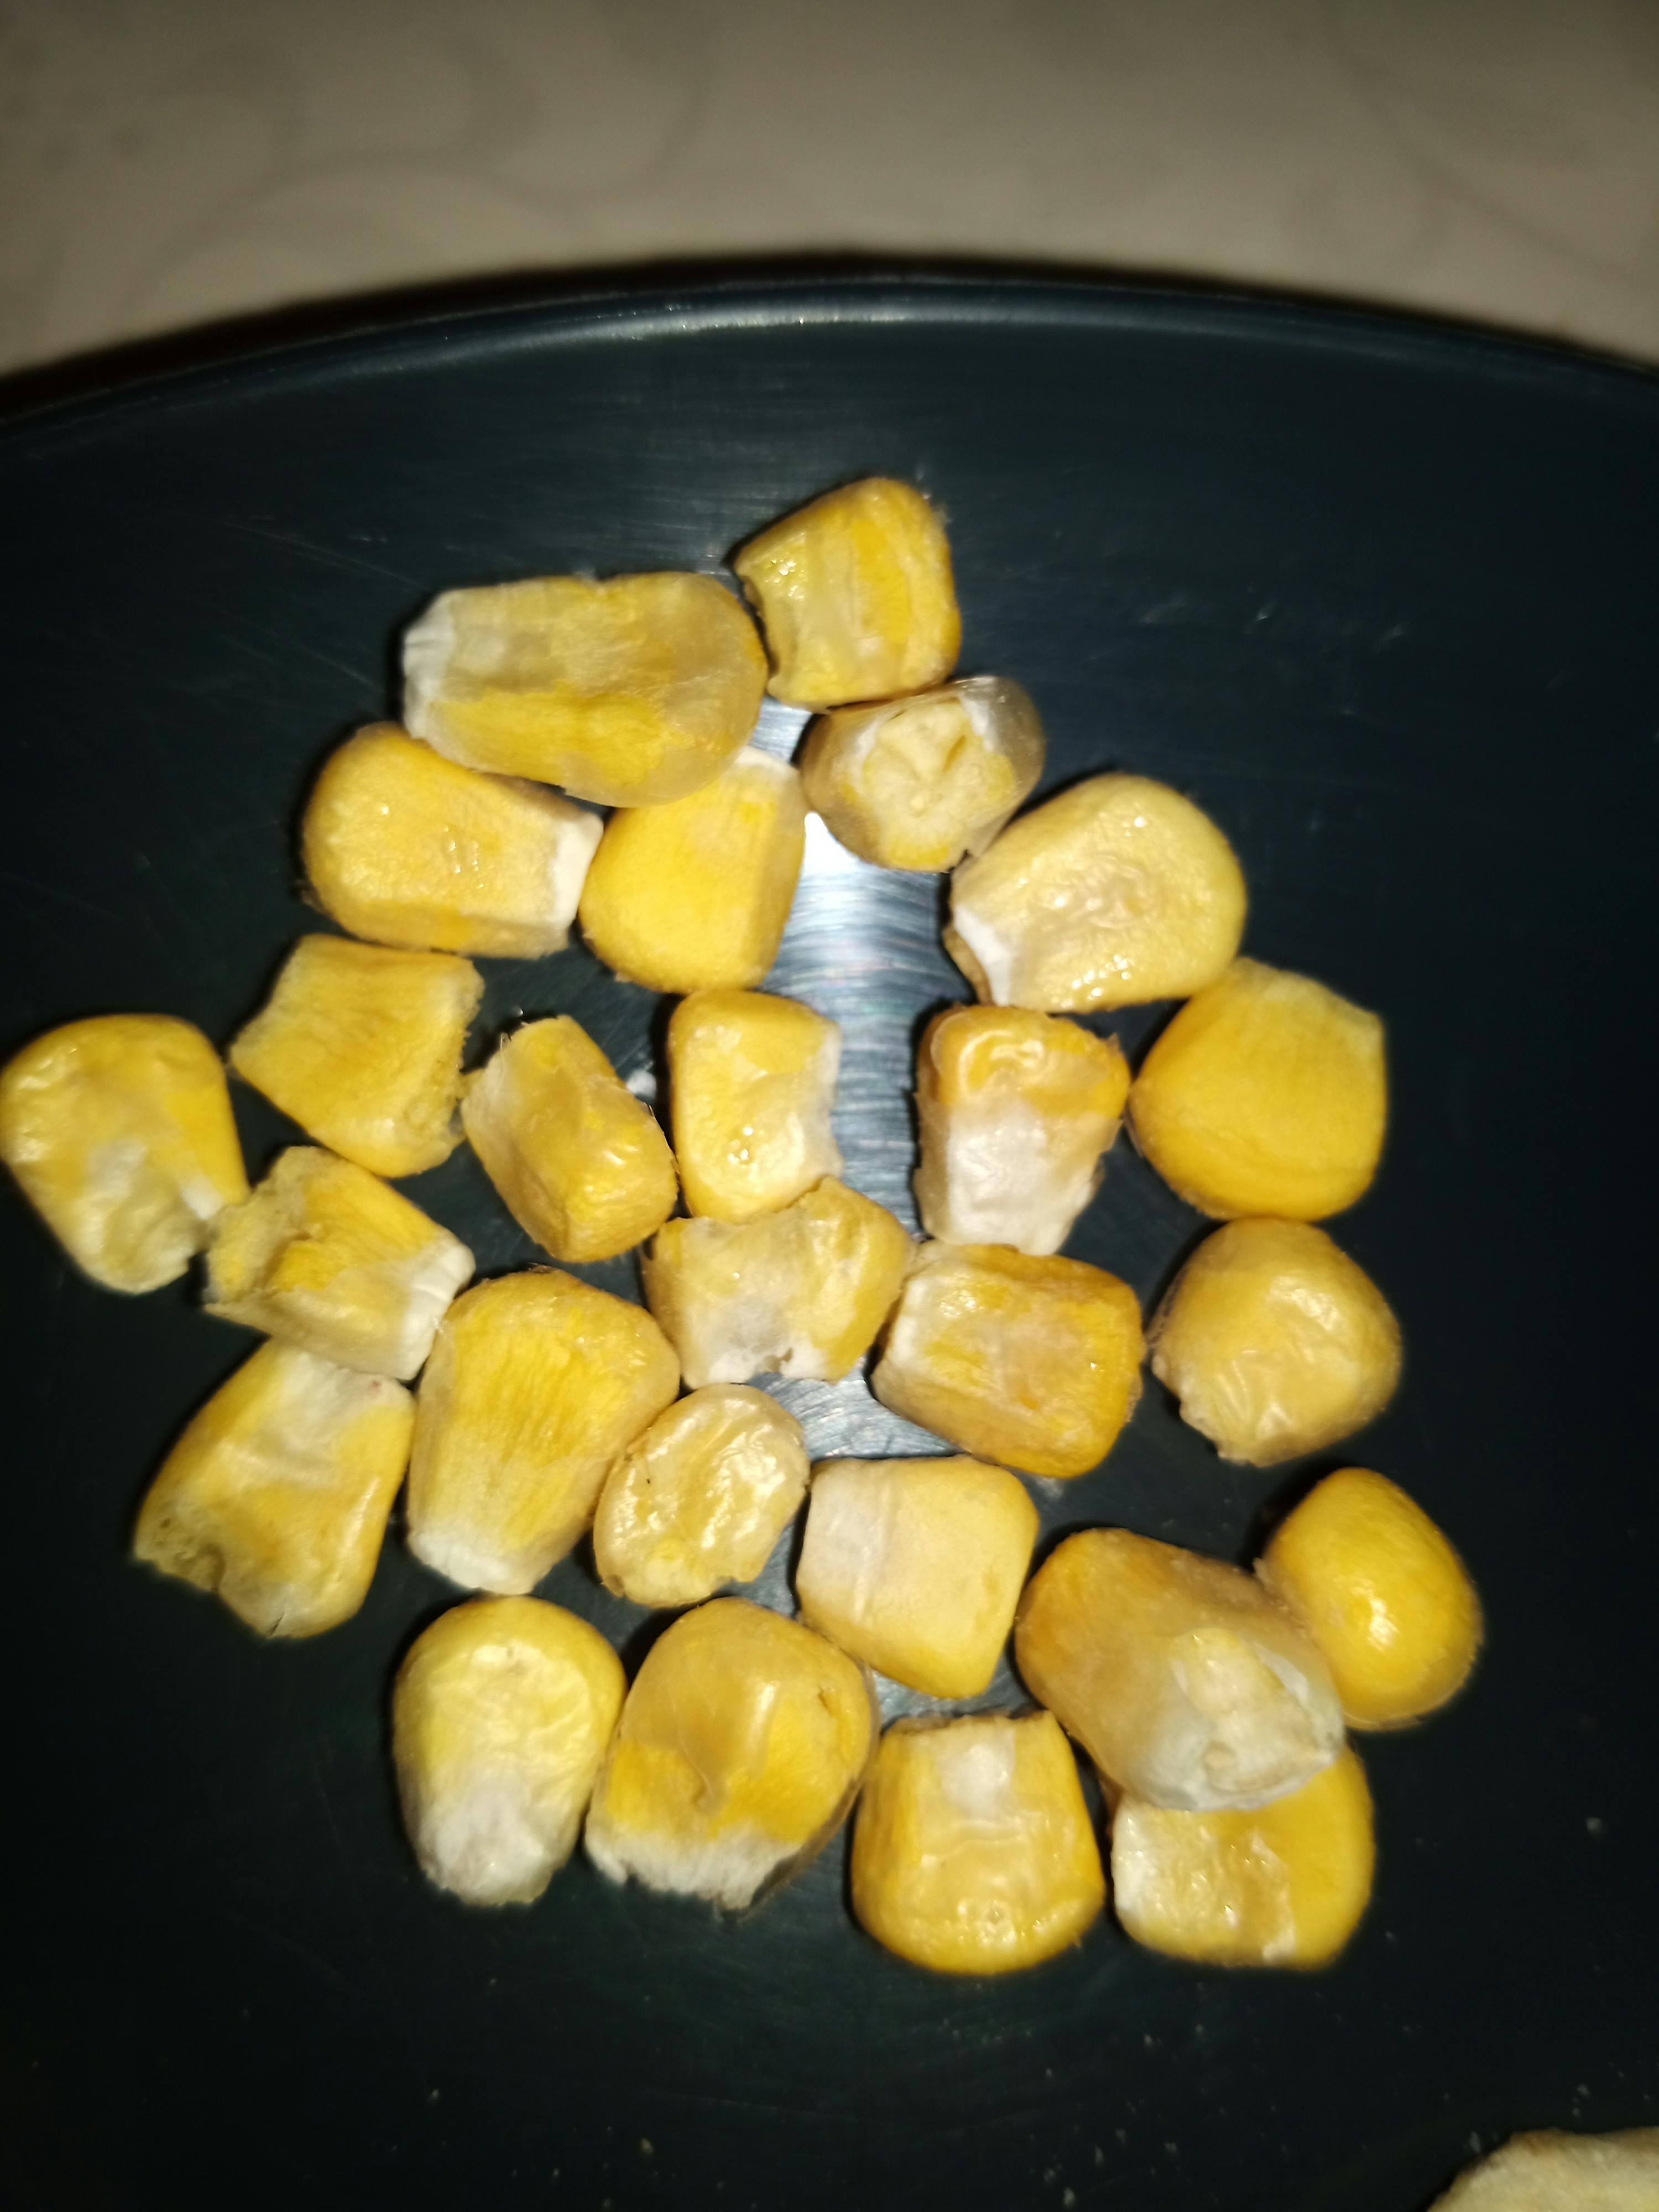 Freeze Dried Sweet Corn: Flex Foods is one the largest processors of Freeze  Dried Sweet Corn. We grow our sweet corn under controlled conditions as per  the European MRLS. Some of the